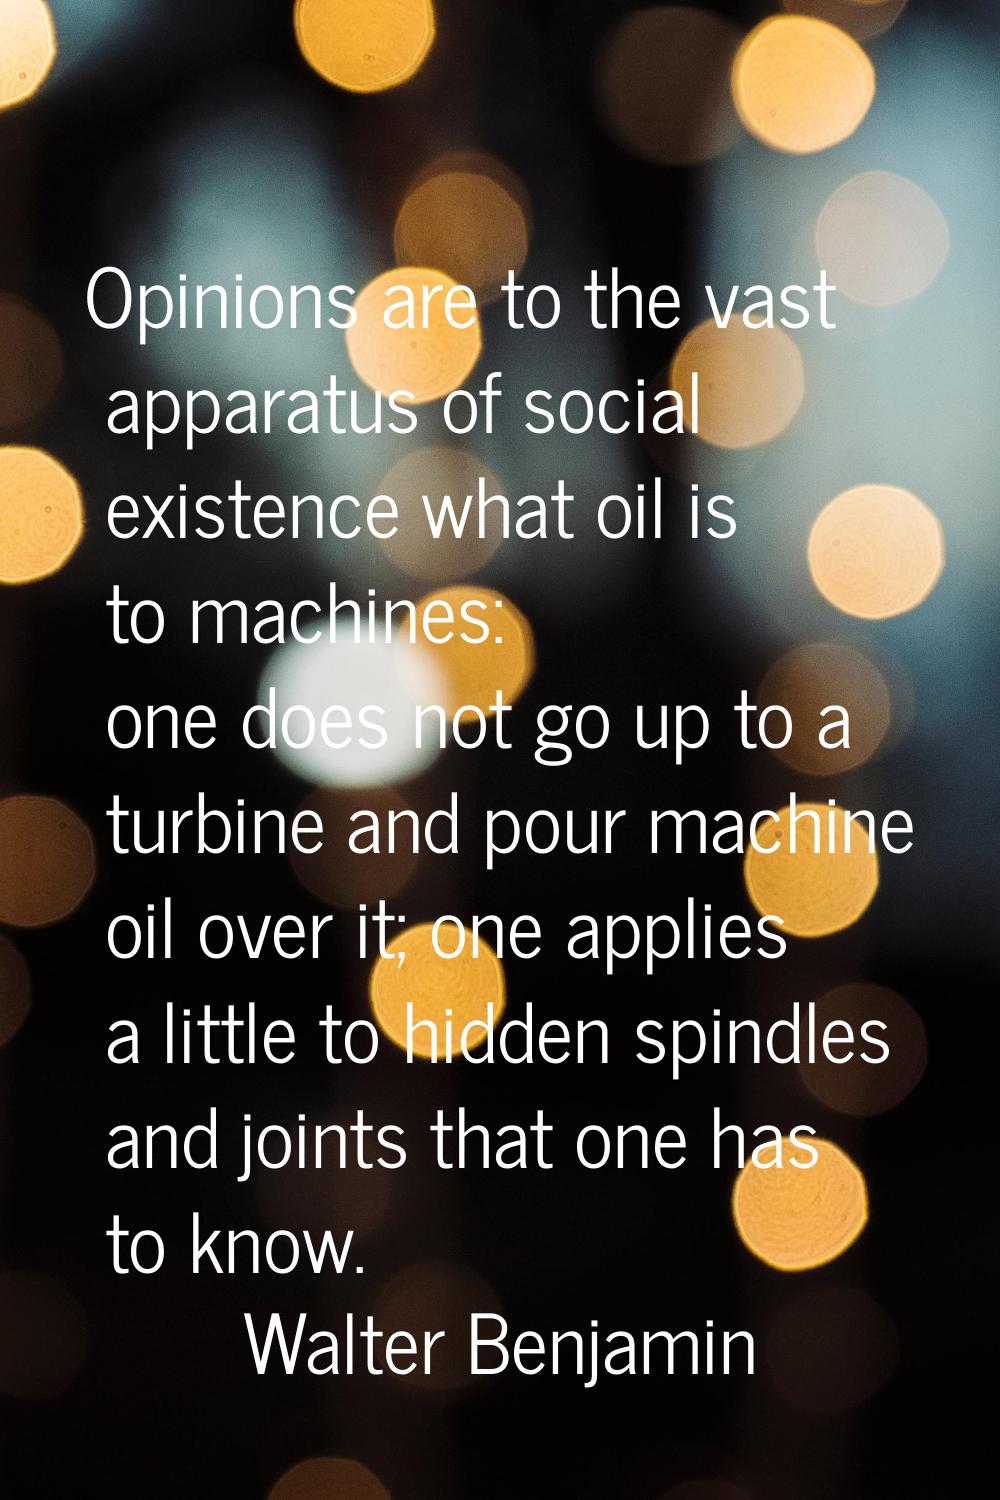 Opinions are to the vast apparatus of social existence what oil is to machines: one does not go up 